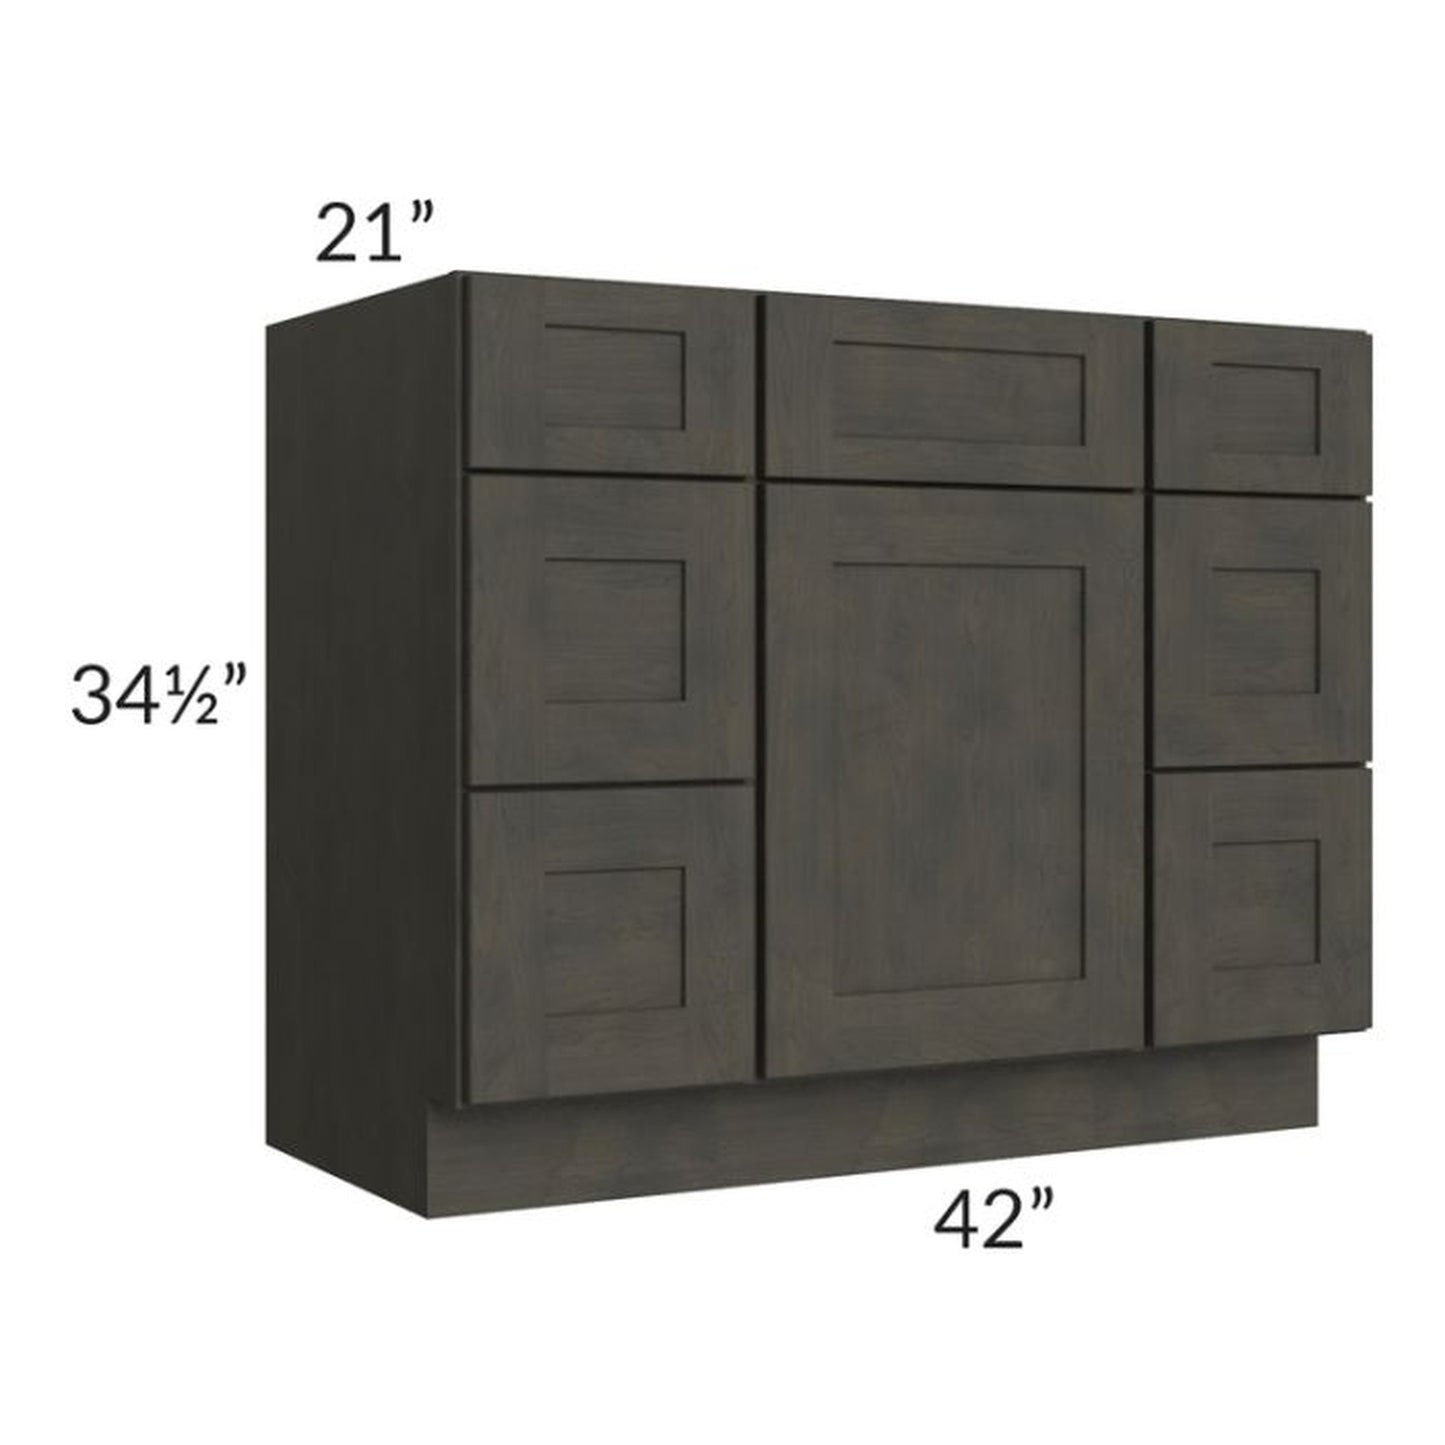 RTA Charcoal Grey Shaker 42" Vanity Base Cabinet 1 with 1 Decorative End Panel